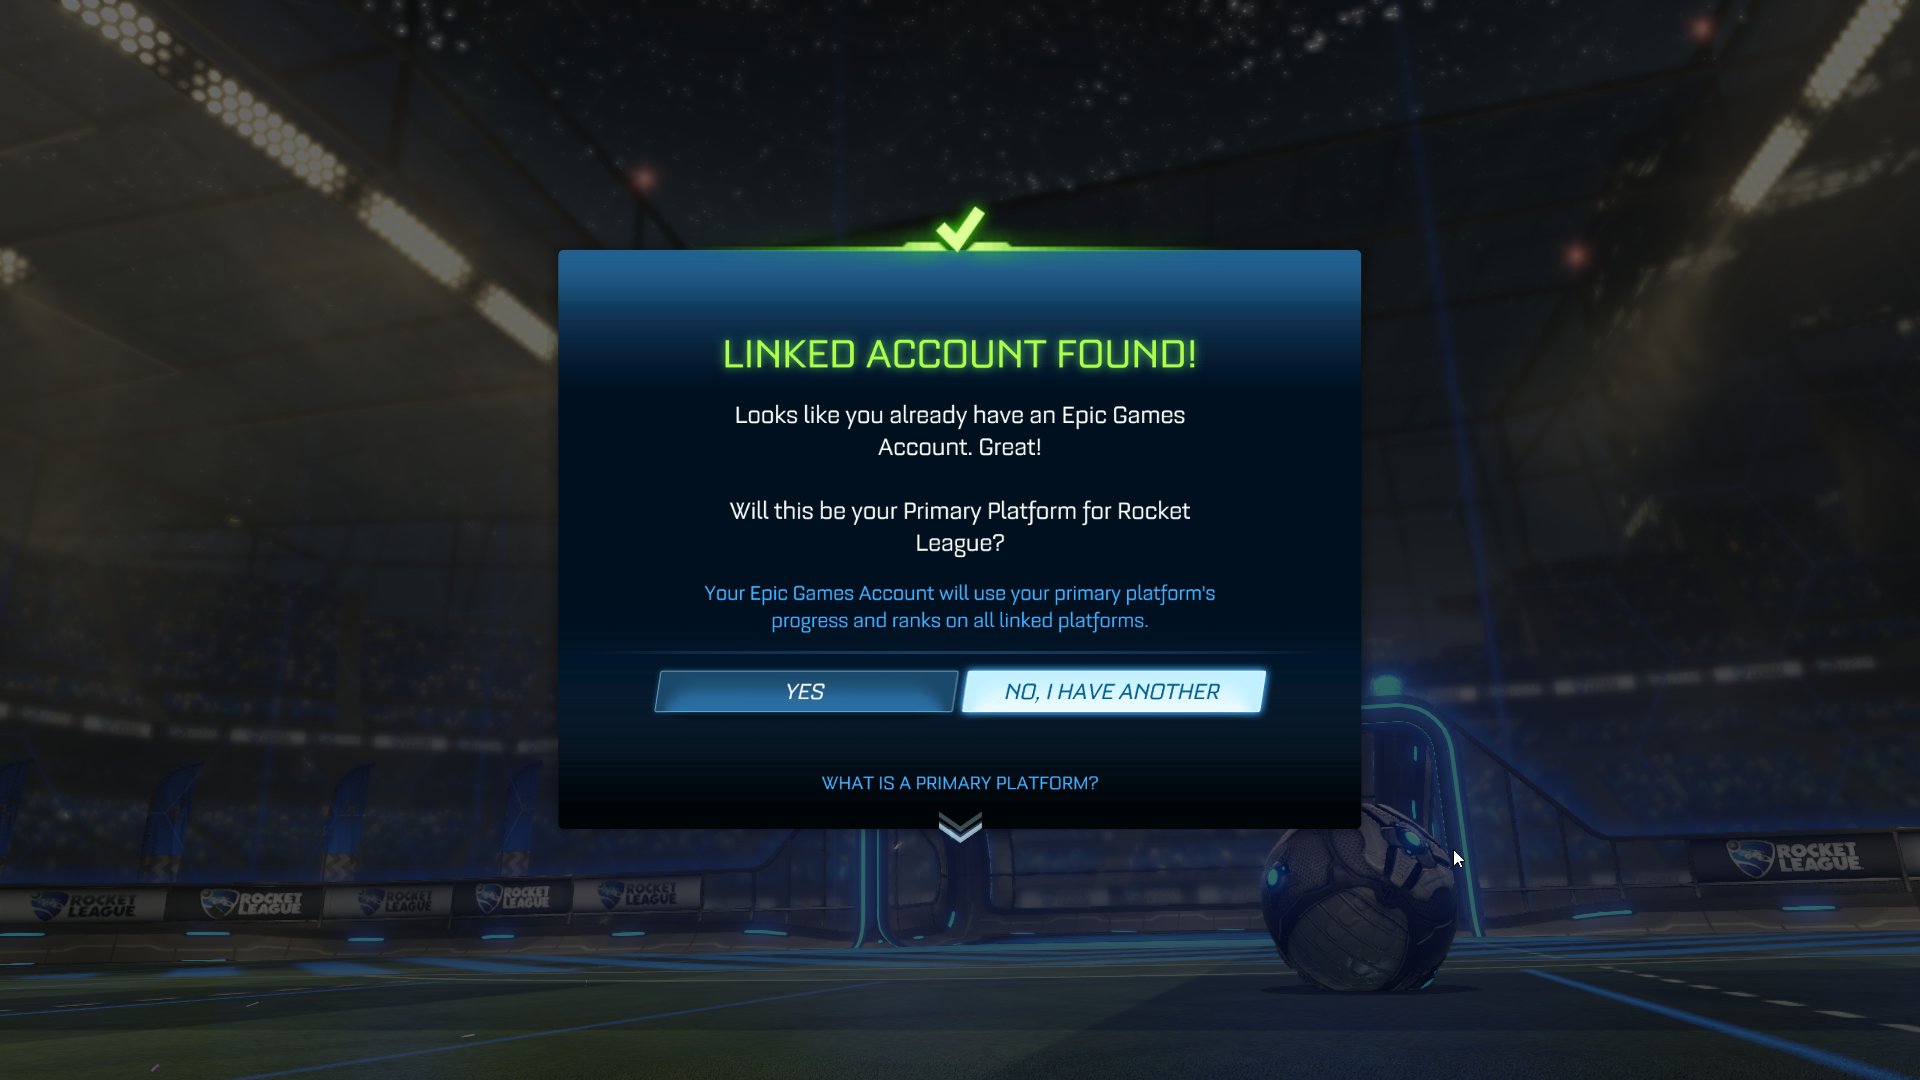 Ifiremonkey Auf Twitter Rocket League Thread This Thread Will Go Over The Changes Pushed To The Steam Switch Xbox And Ps4 Version Of The Game Today The Game Is Still Not Out